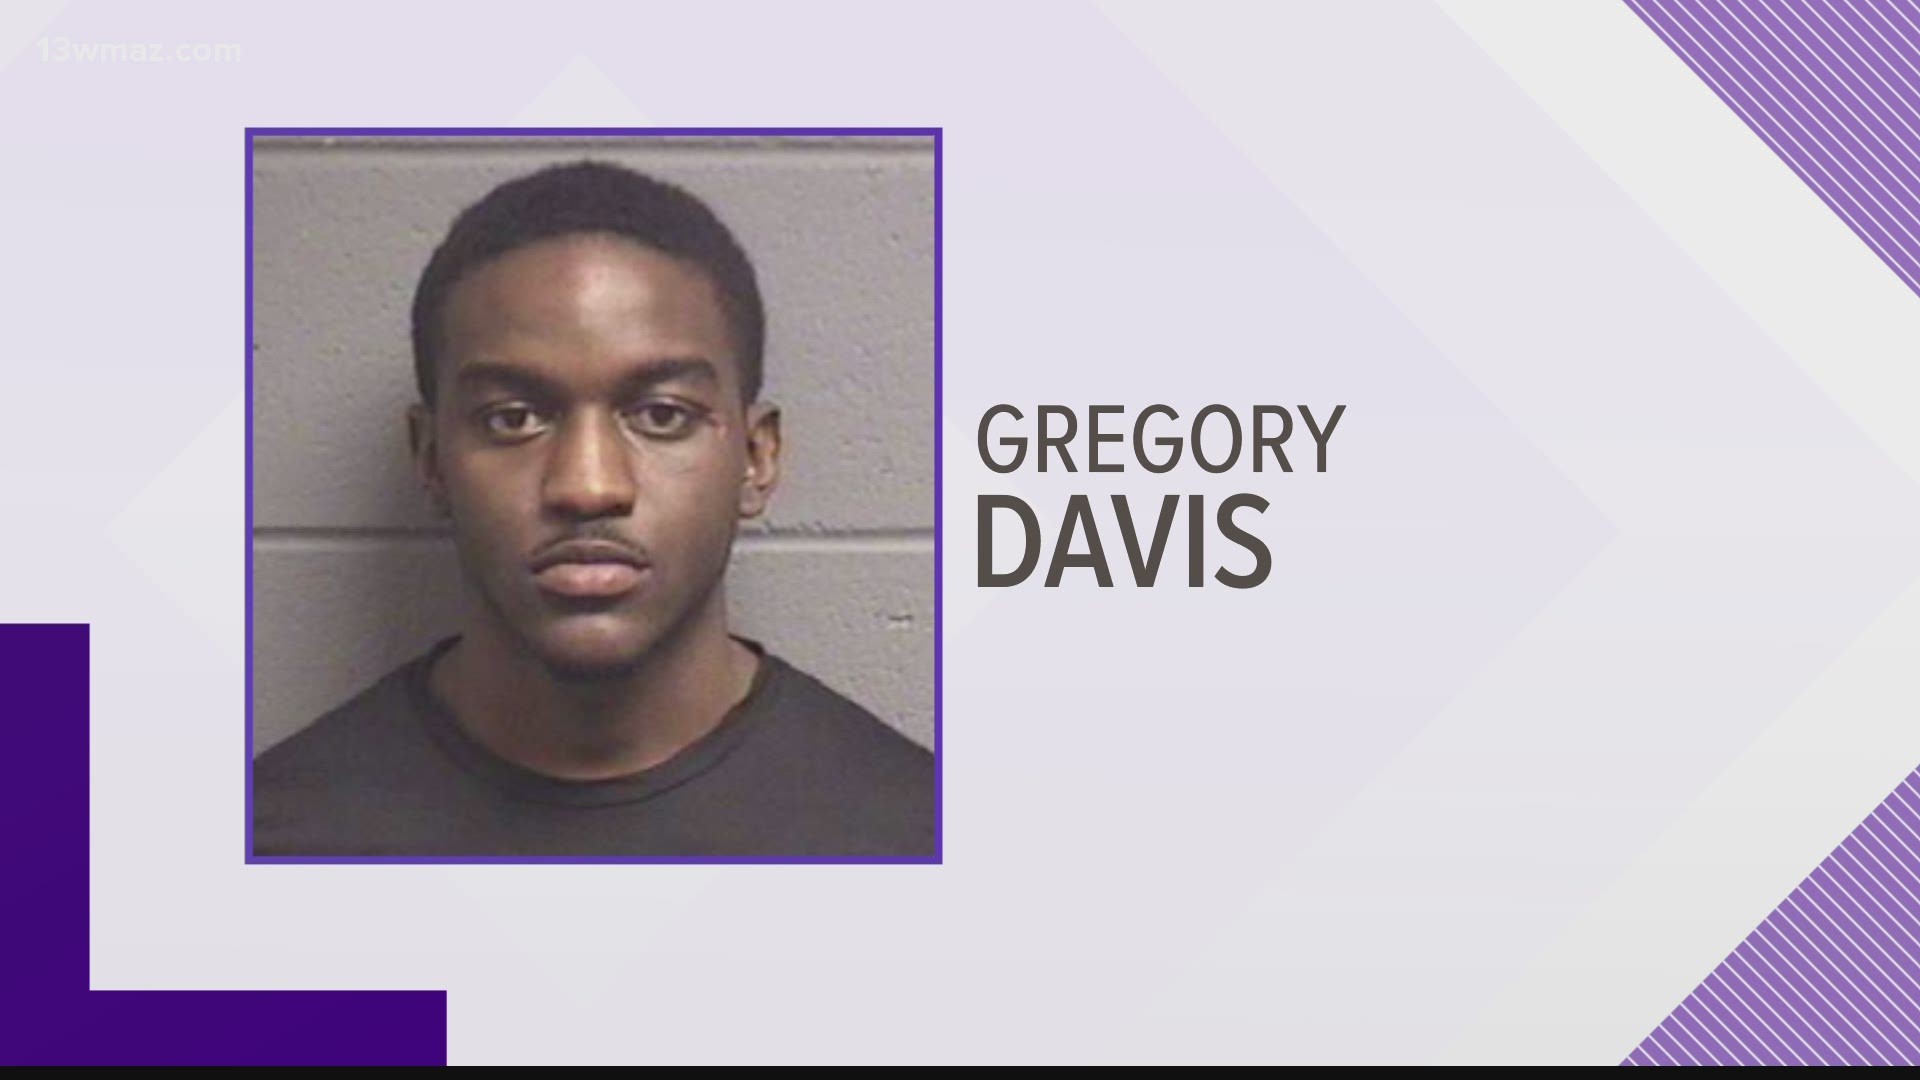 Warner Robins deputies arrested 20-year-old Gregory Davis in the shooting death of 19-year-old Deandre Pitts.